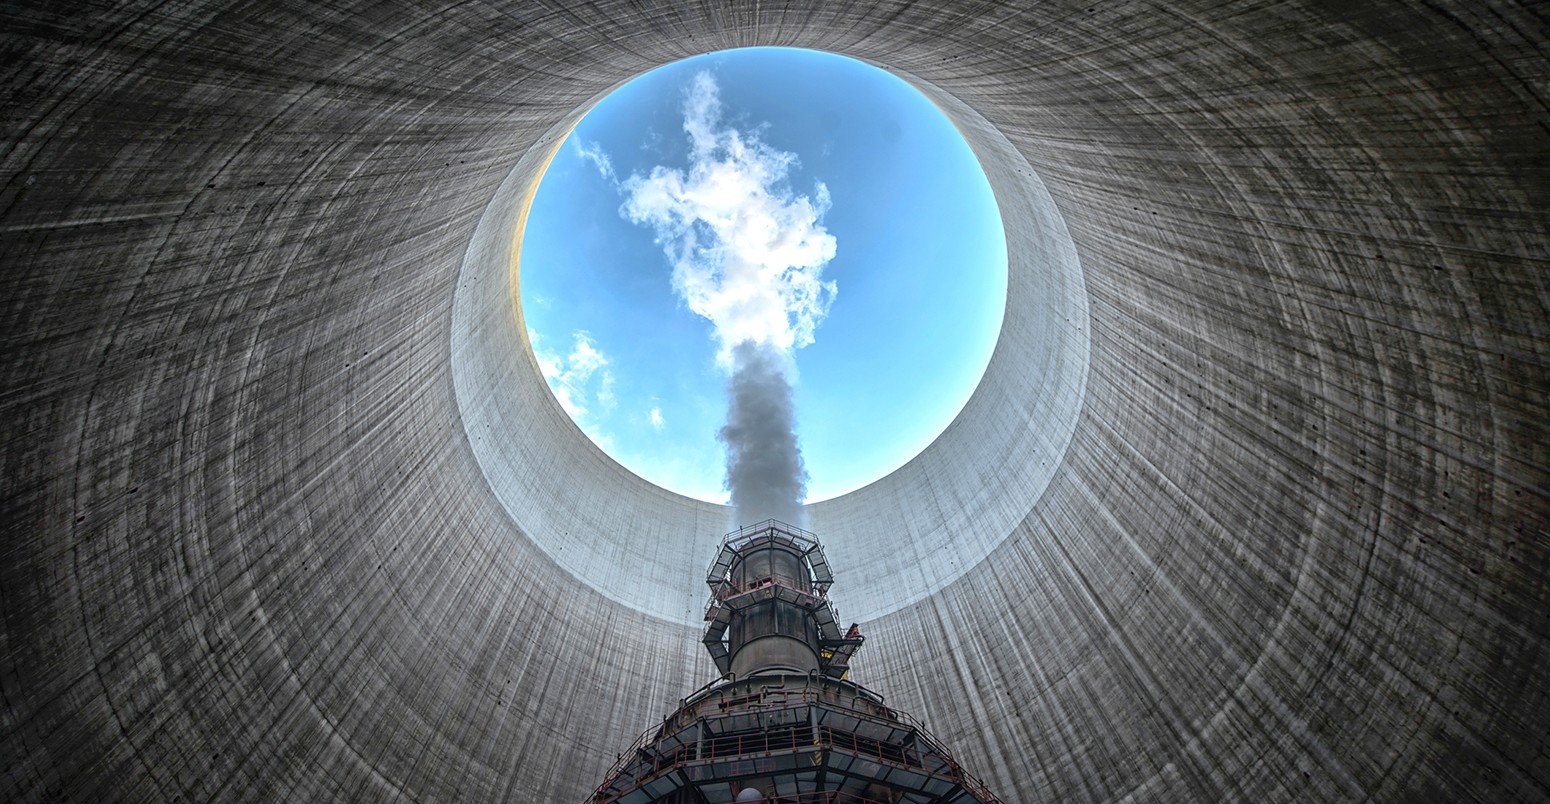 Vast chimney of a thermal power plant